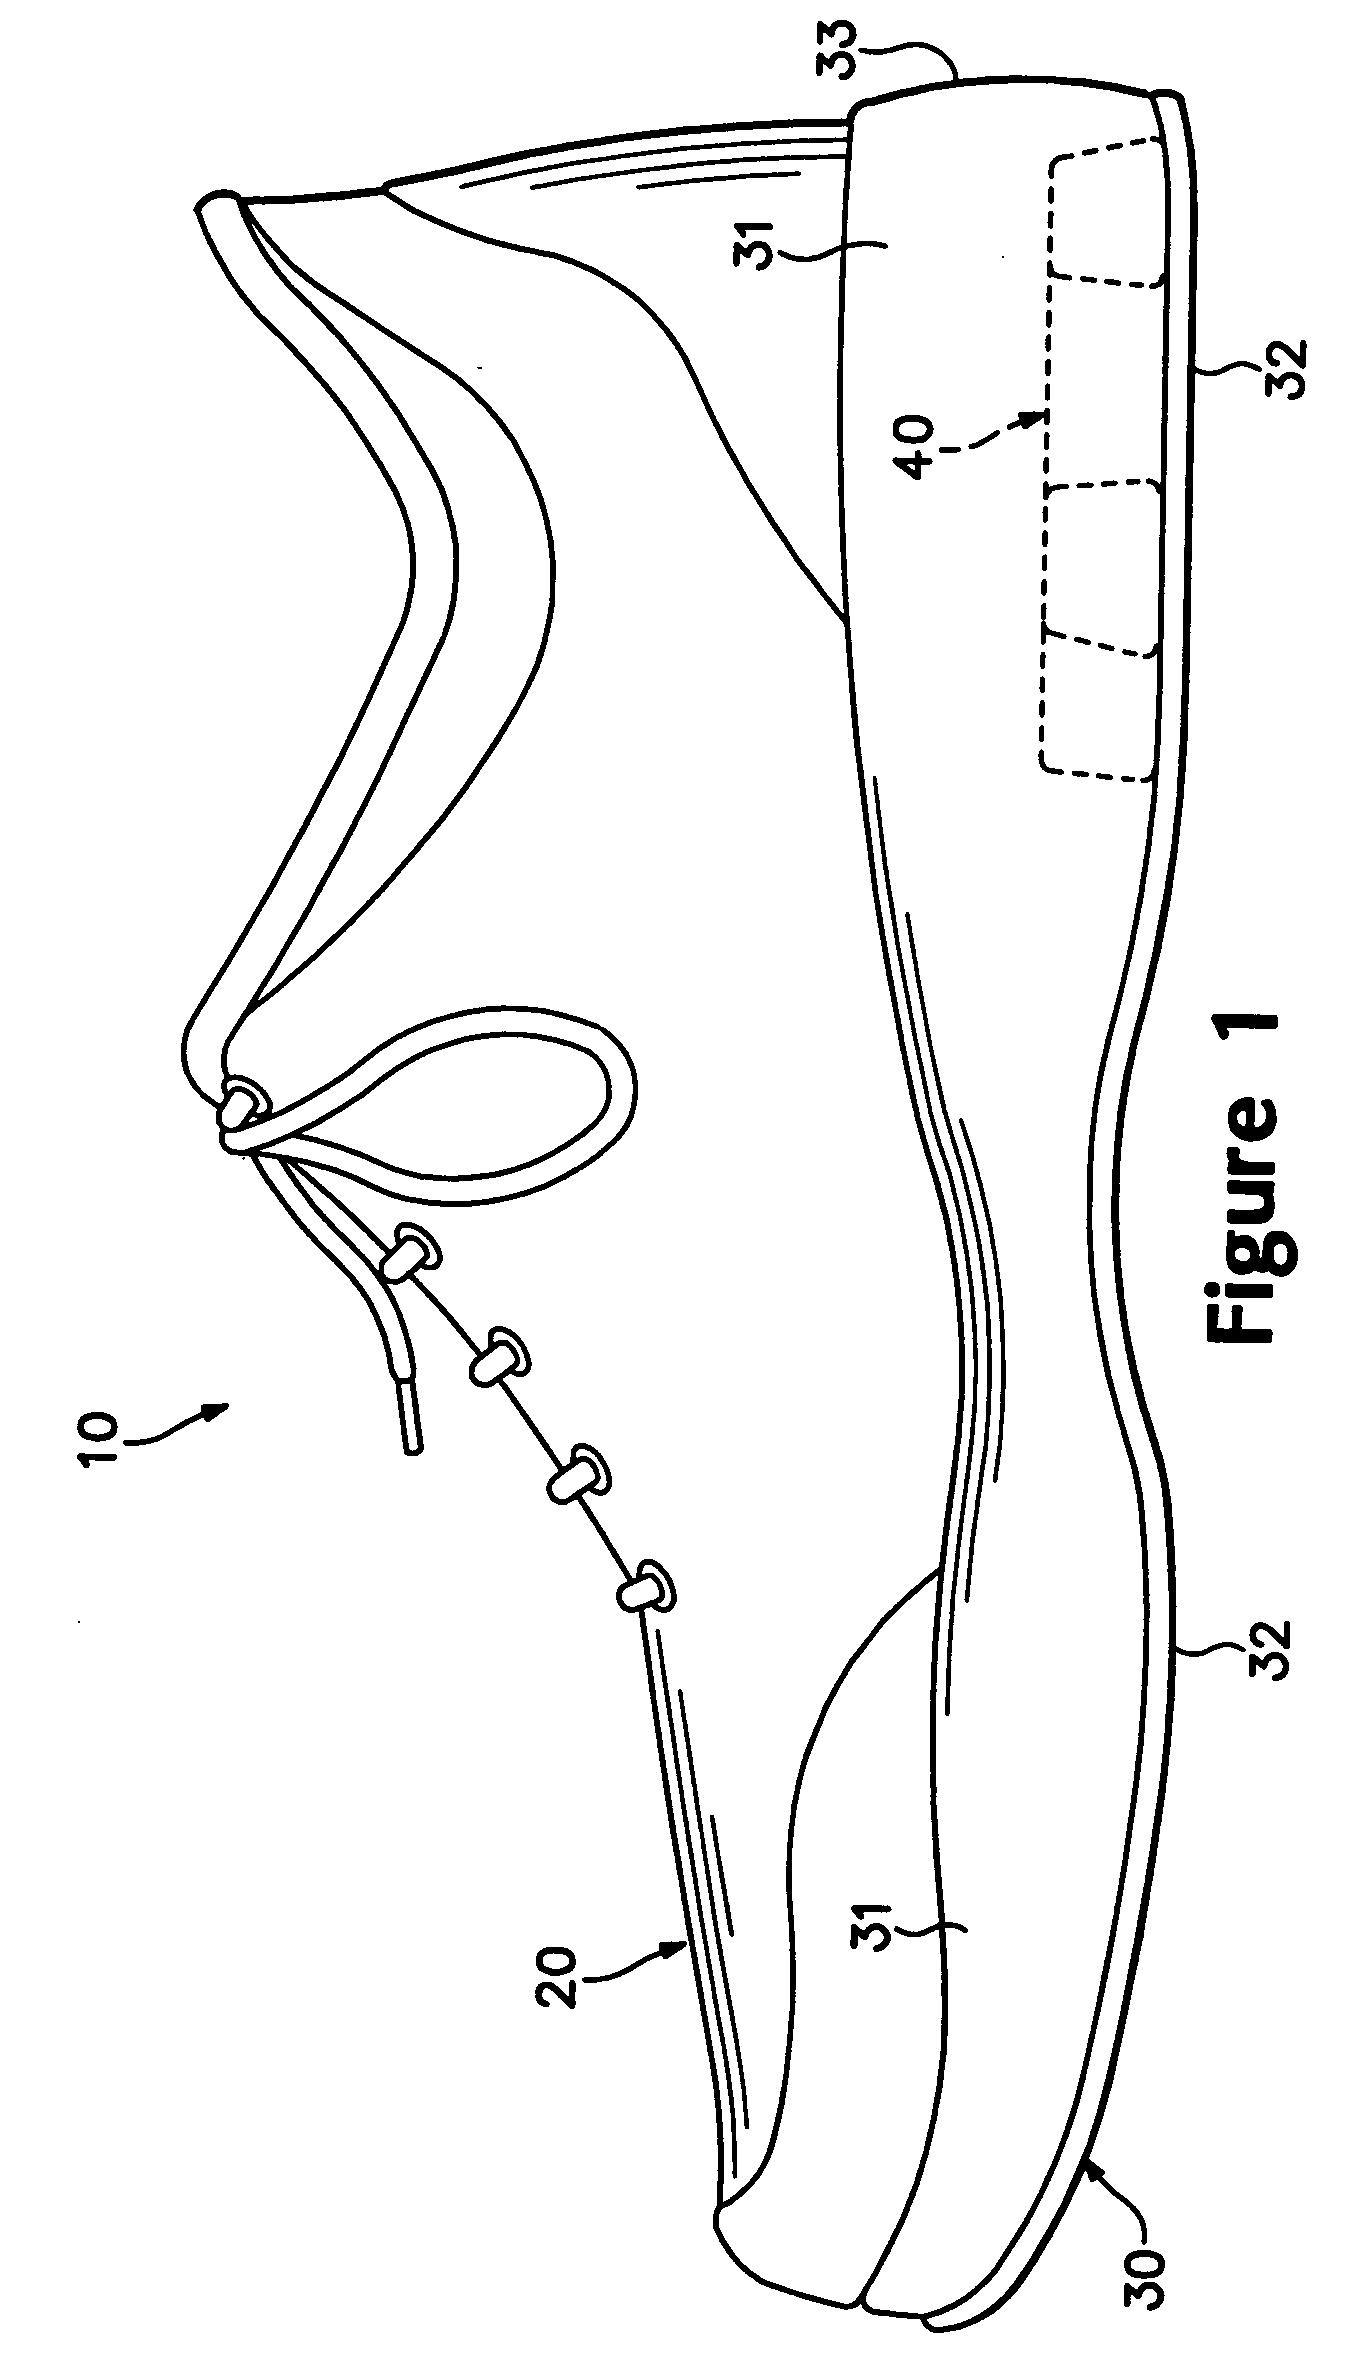 Footwear with a sole structure incorporating a lobed fluid-filled chamber